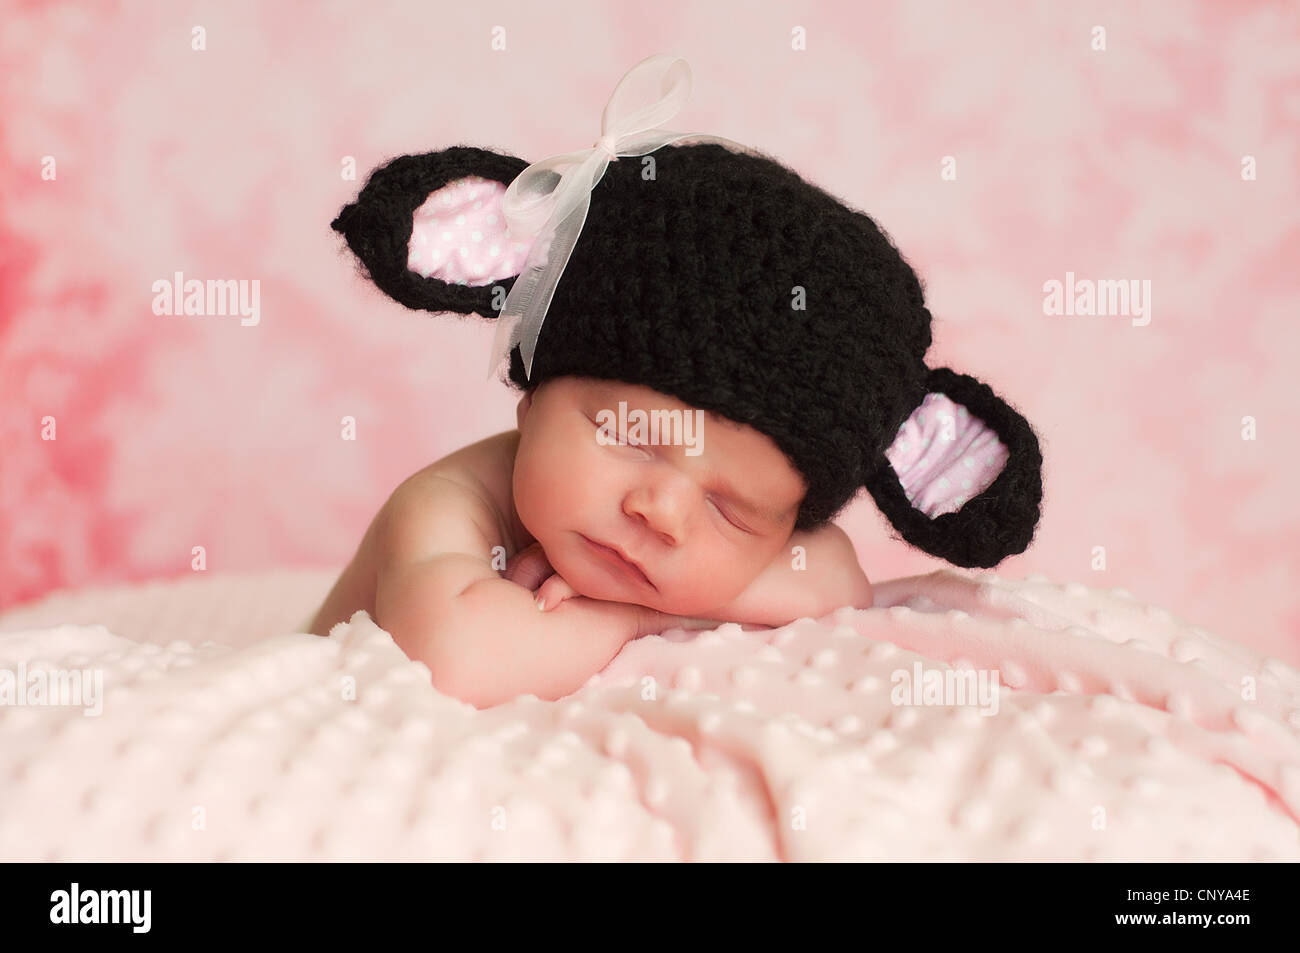 2 week old newborn girl wearing a black crocheted black sheep hat sleeping on a pink blanket with a pink background. Stock Photo